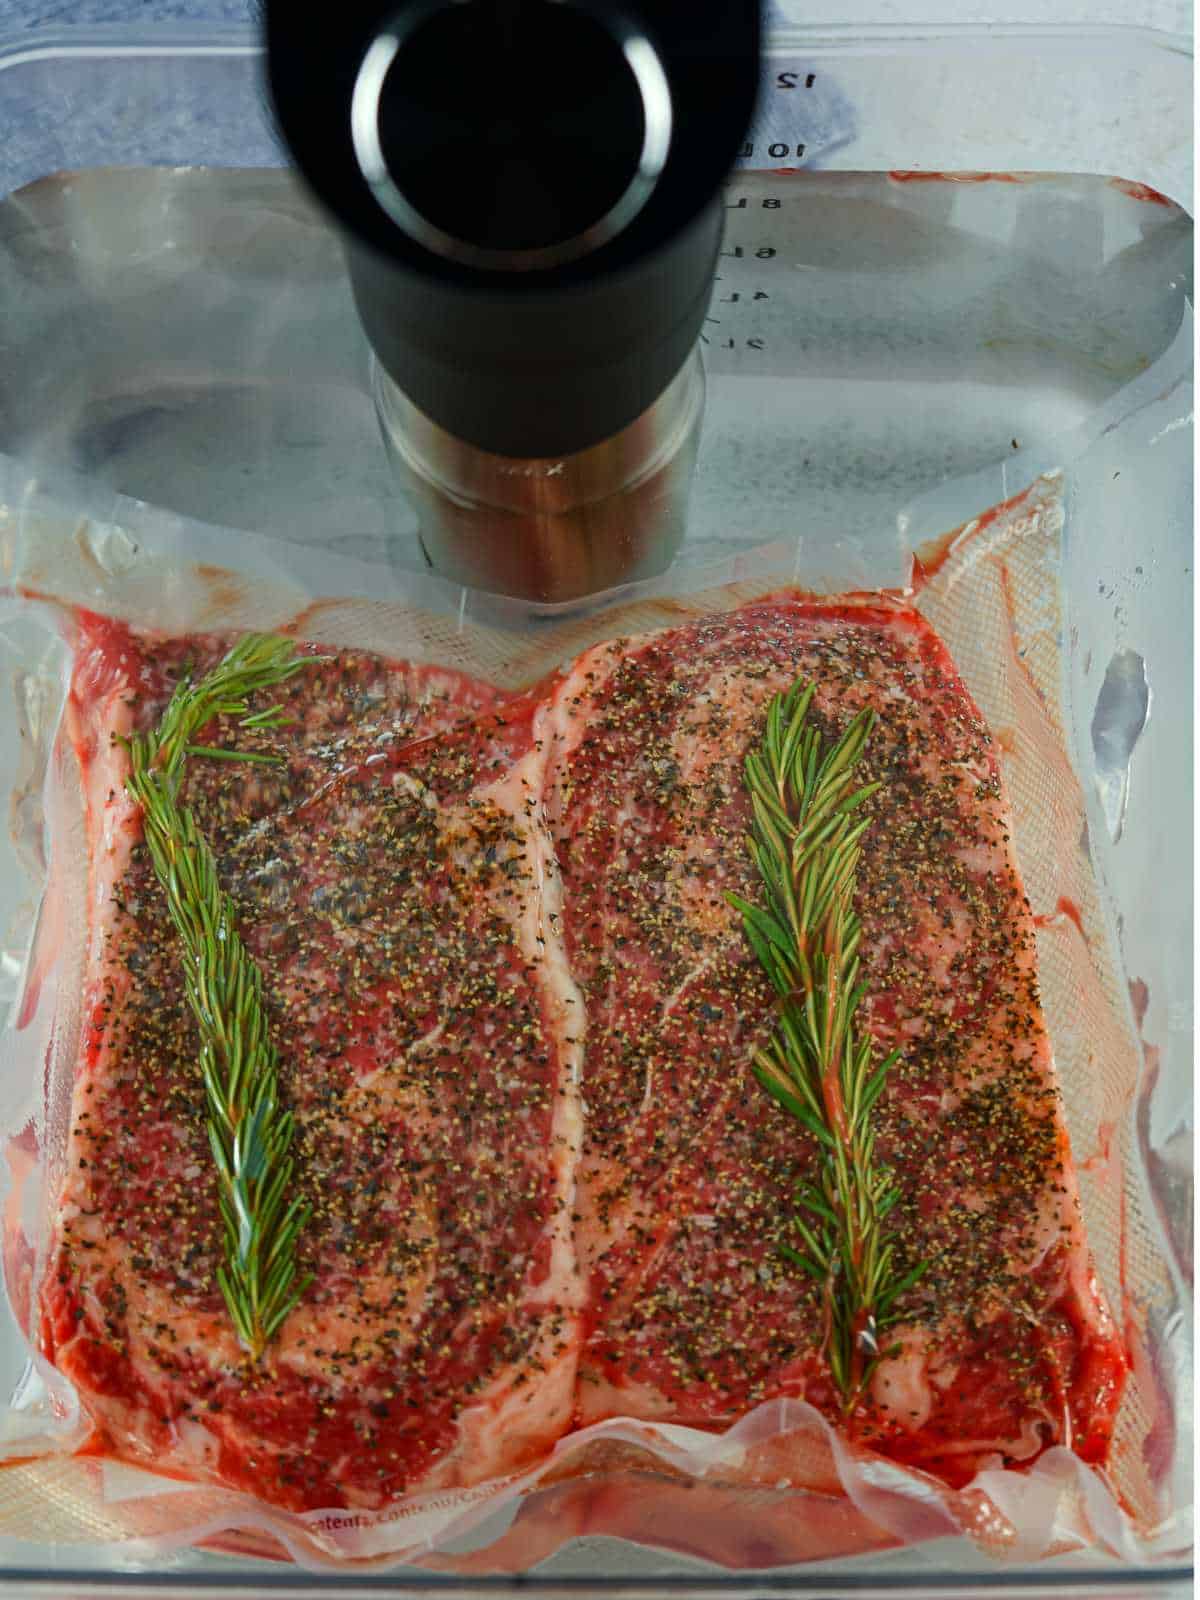 sous vide bag of steaks in water with sous vide attachment connected.